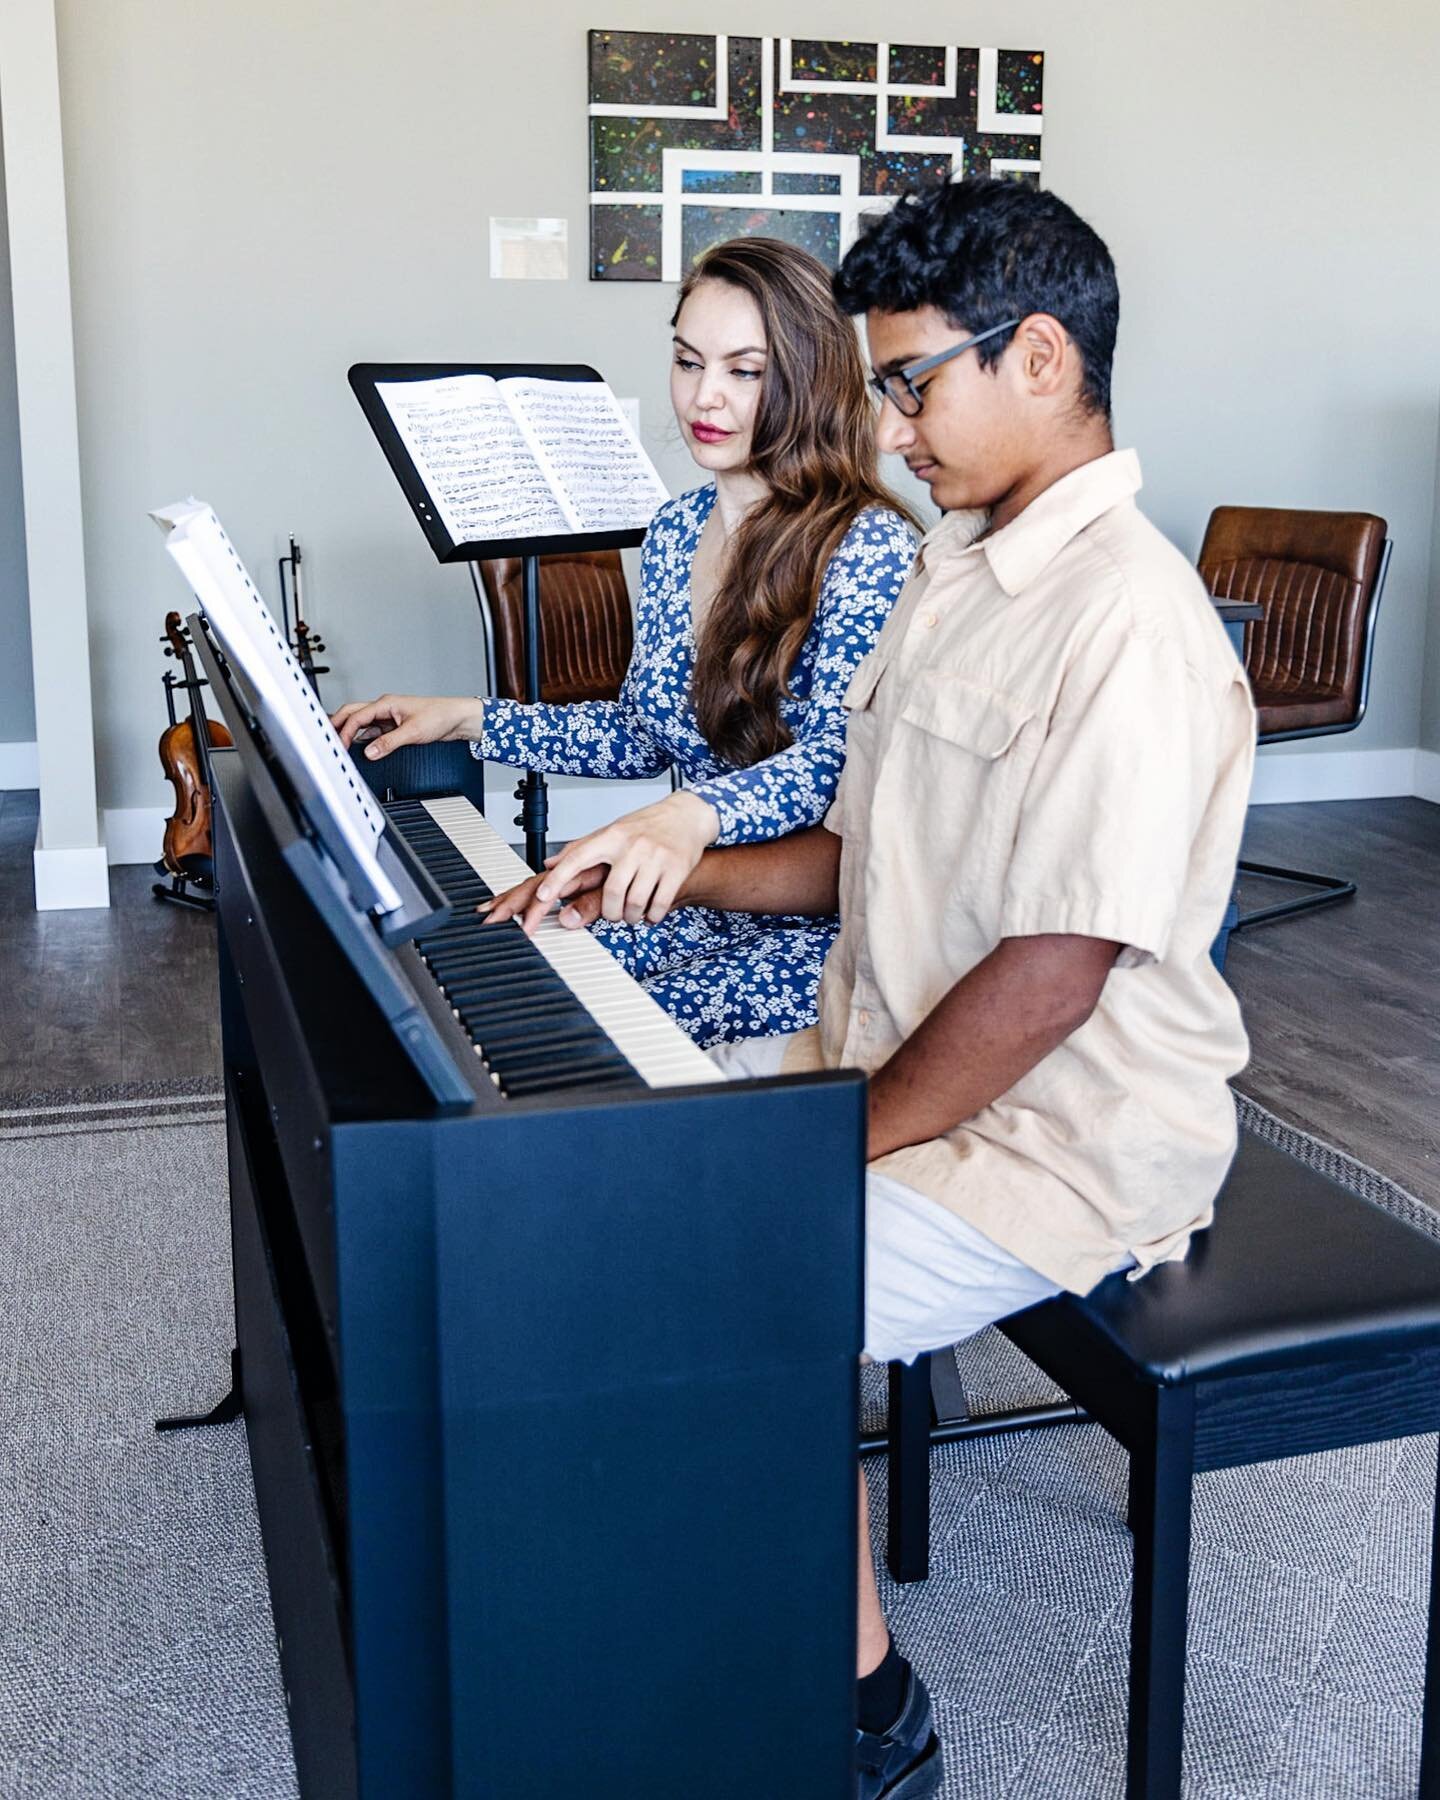 Vancouver Island Conservatory of Music &amp; Arts offers one-on-one private classes for students to achieve their personal goals and move comfortably at their own pace. 

Recently we have been asked what age group we teach, we teach all ages.  We str